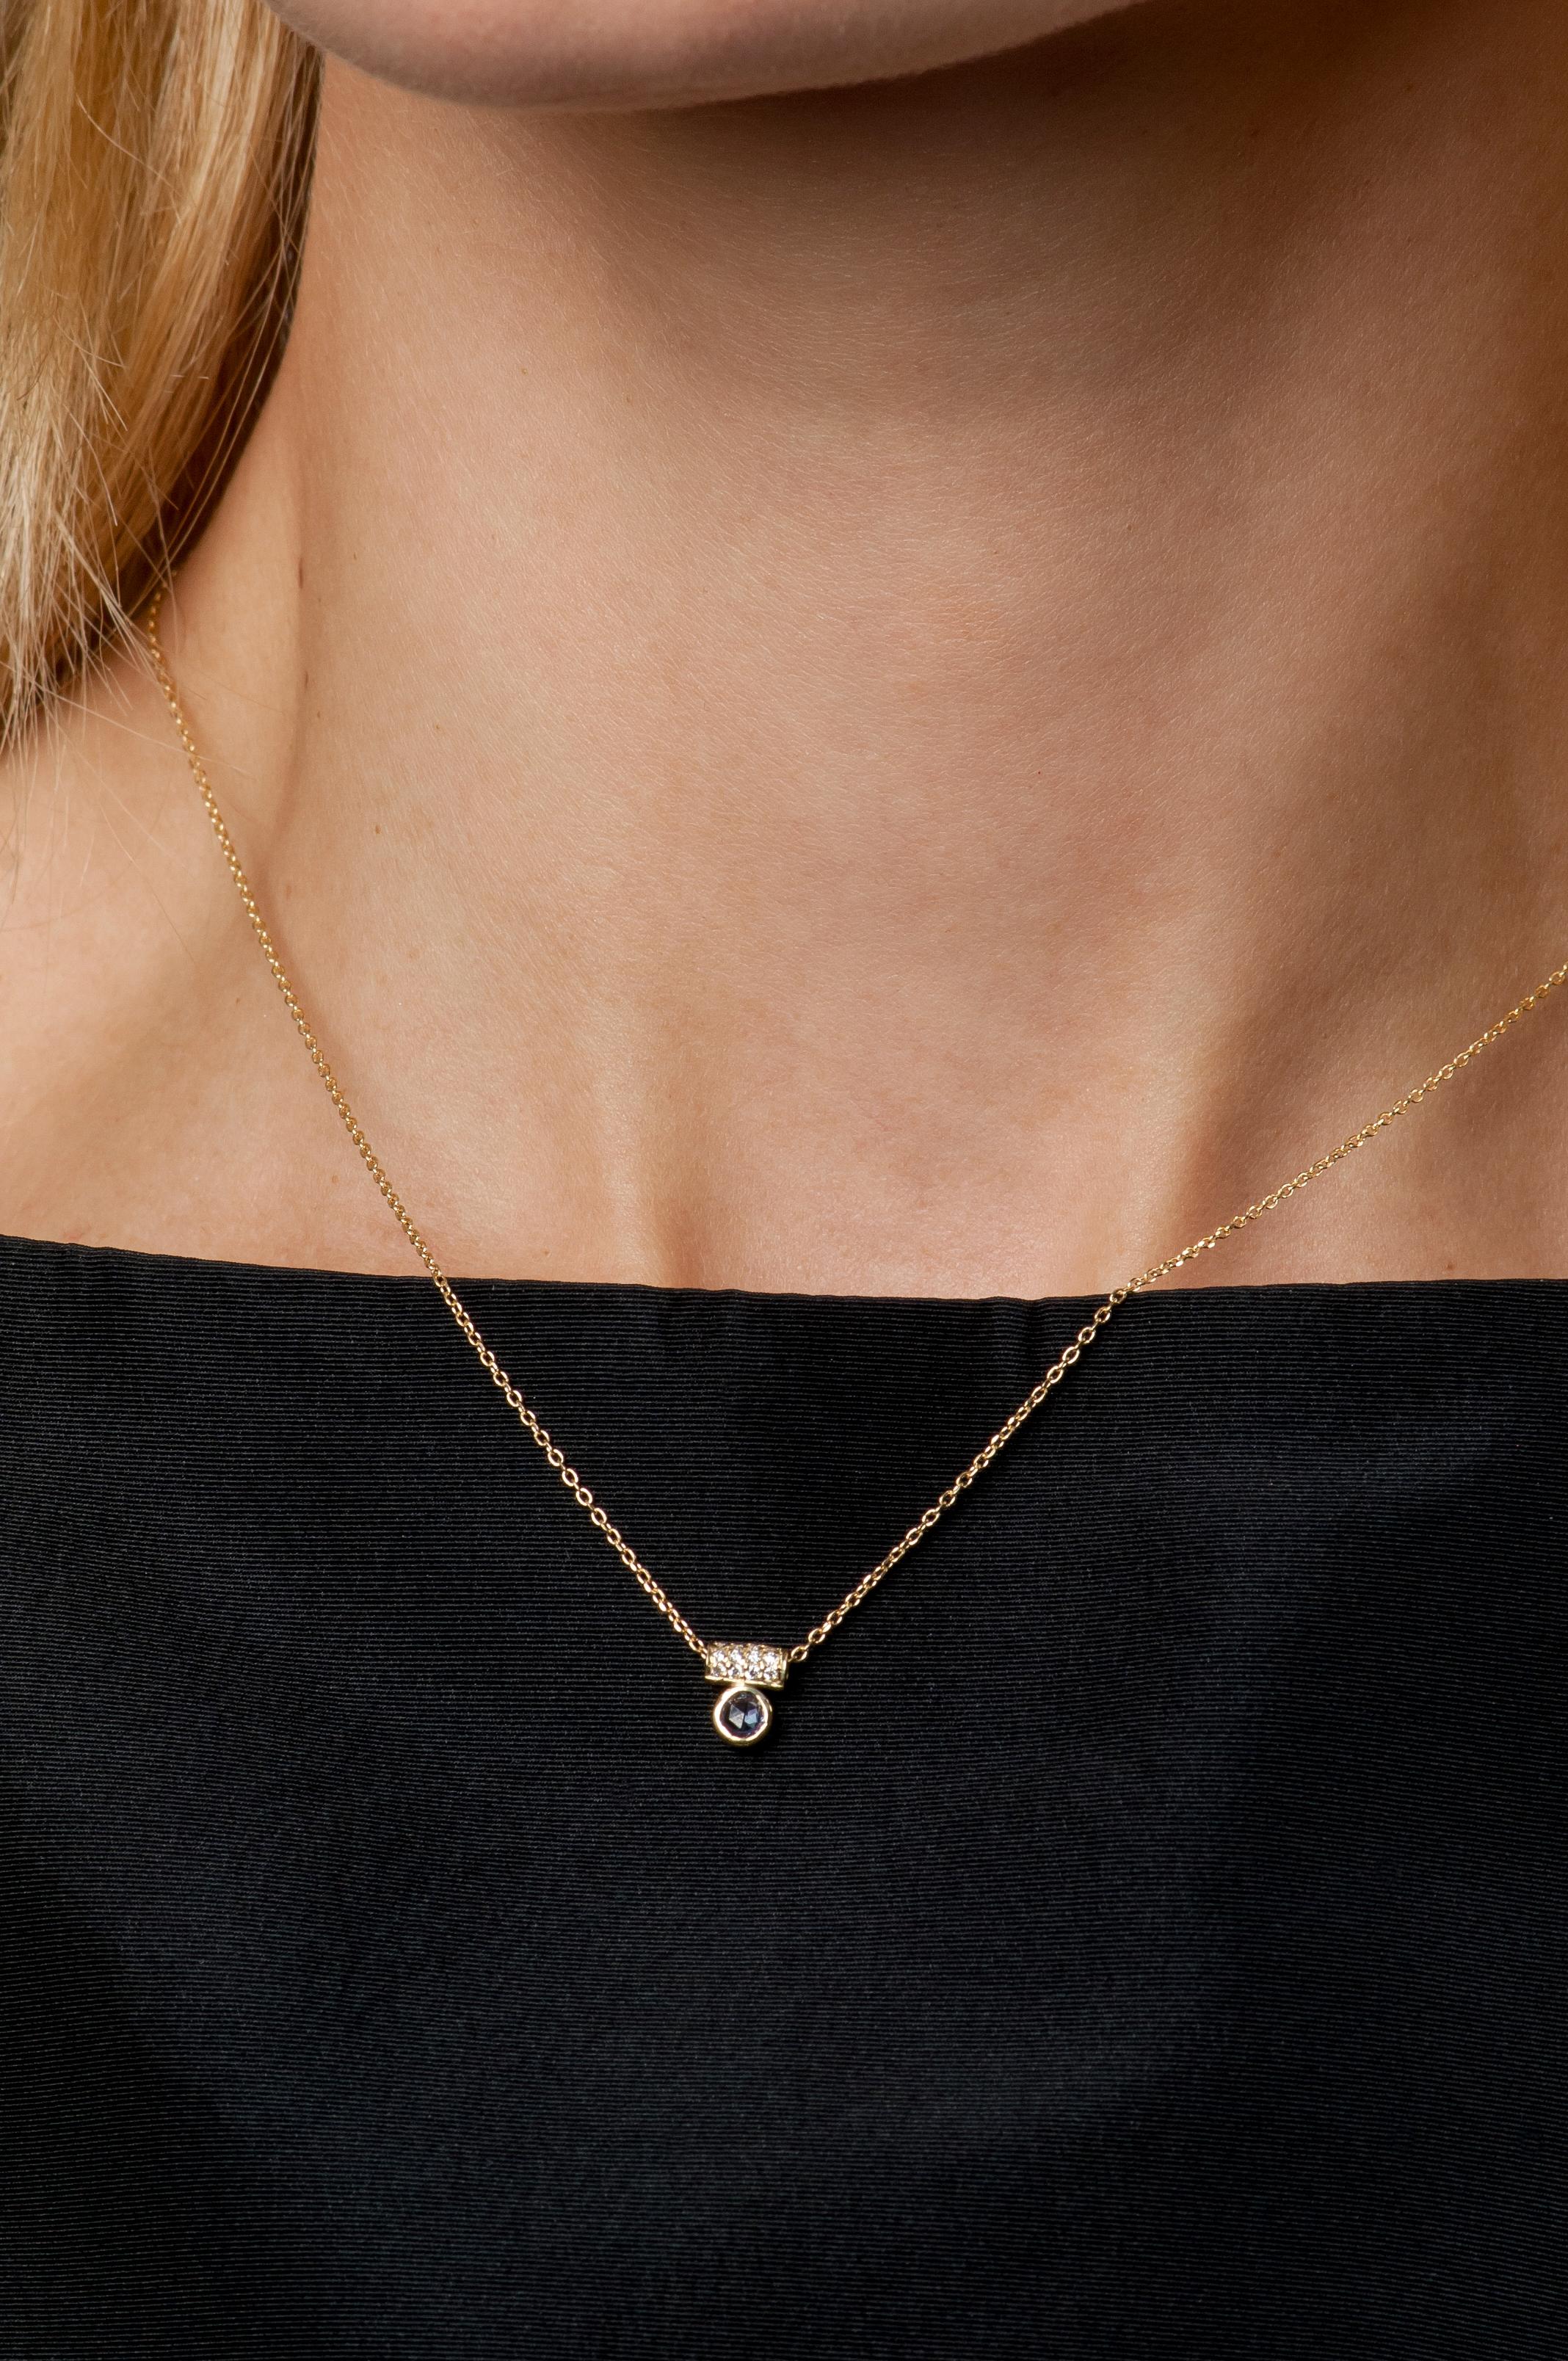 A rose cut blue sapphire floats below a diamond encrusted tube on this delicate necklace. Perfect for layering with other favorite pieces.

18K yellow gold chain with 0.14 inch bezel set blue sapphire
Pave set diamond tube pendant totaling 0.06